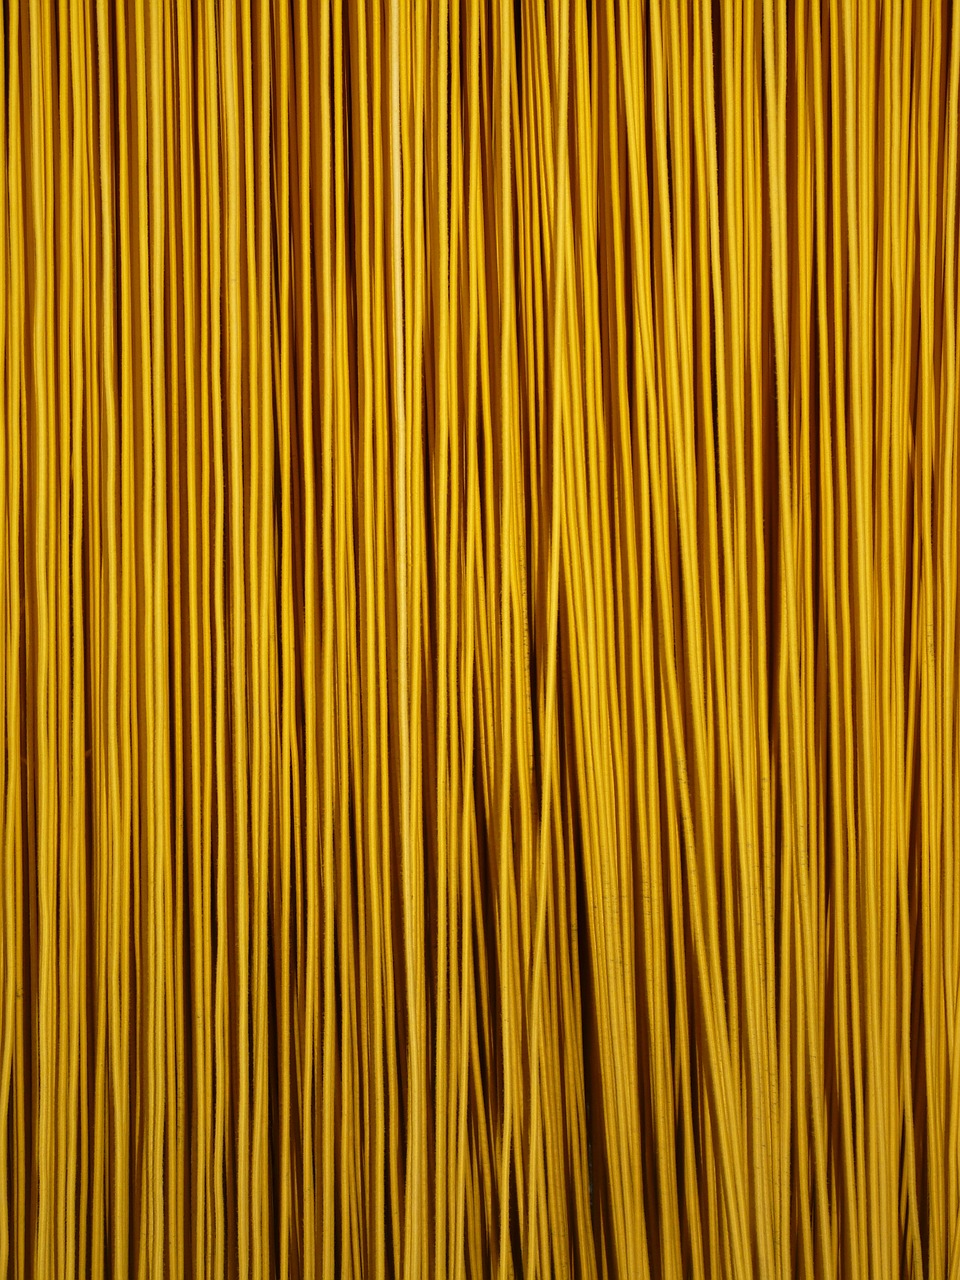 ropes yellow depend free photo